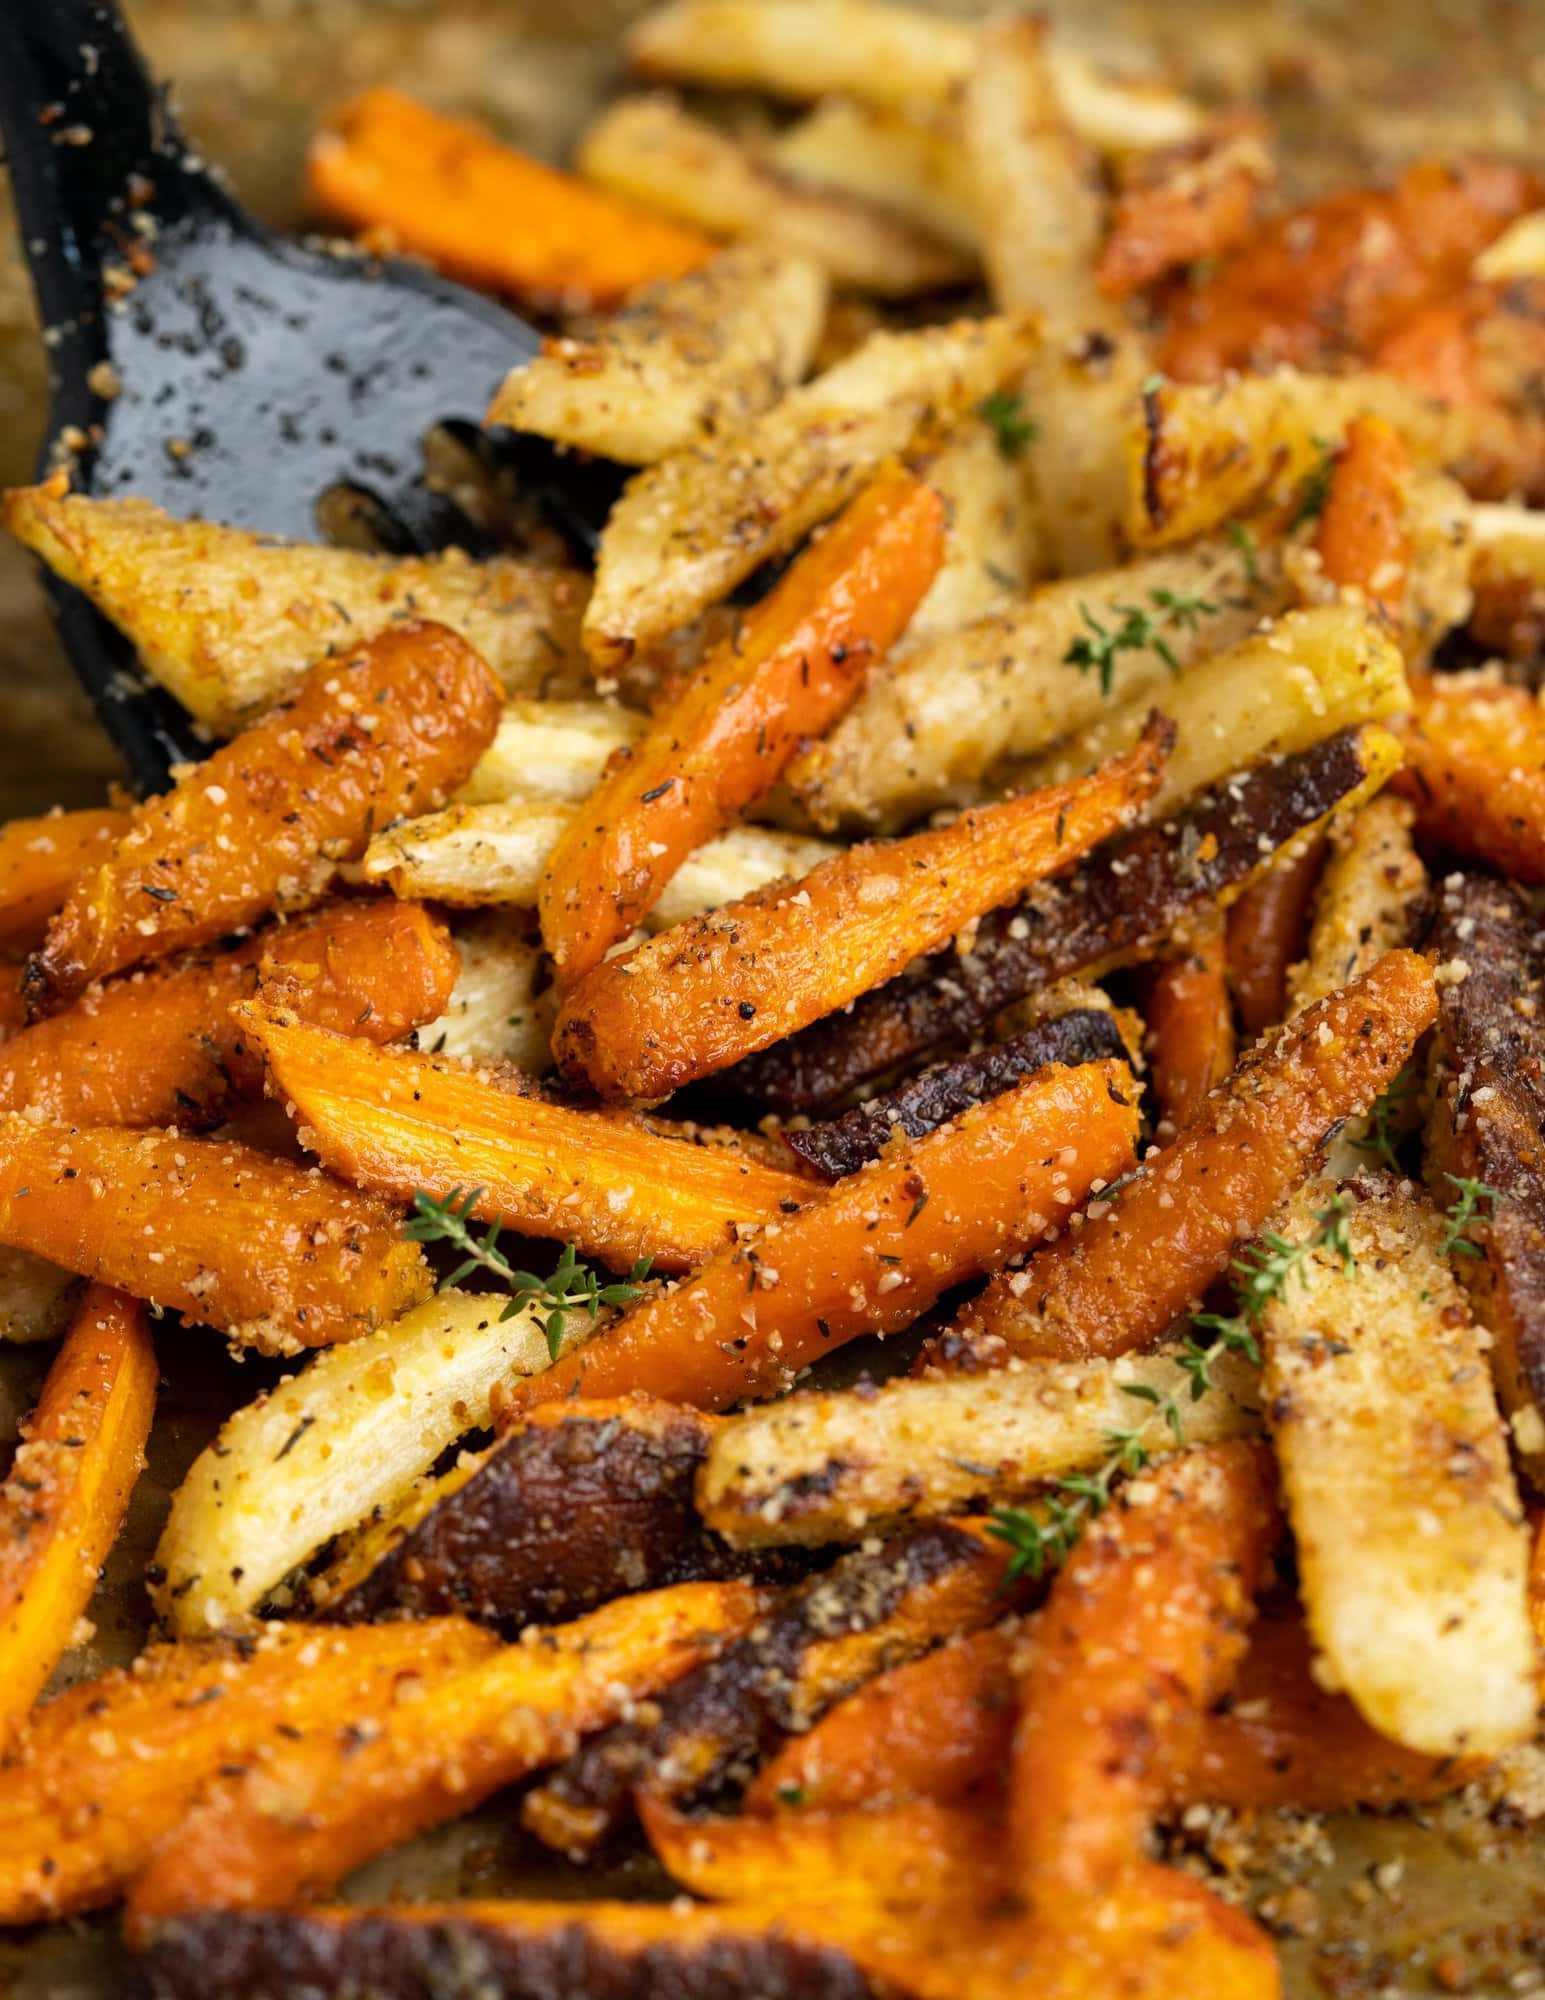 Carrots tossed in butter, olive oil, garlic, herbs, and parmesan cheese makes the best ever roasted Carrots. The natural sweetness of the caramelized carrots complements the savory seasoning, making it one of our favourite side dishes. 